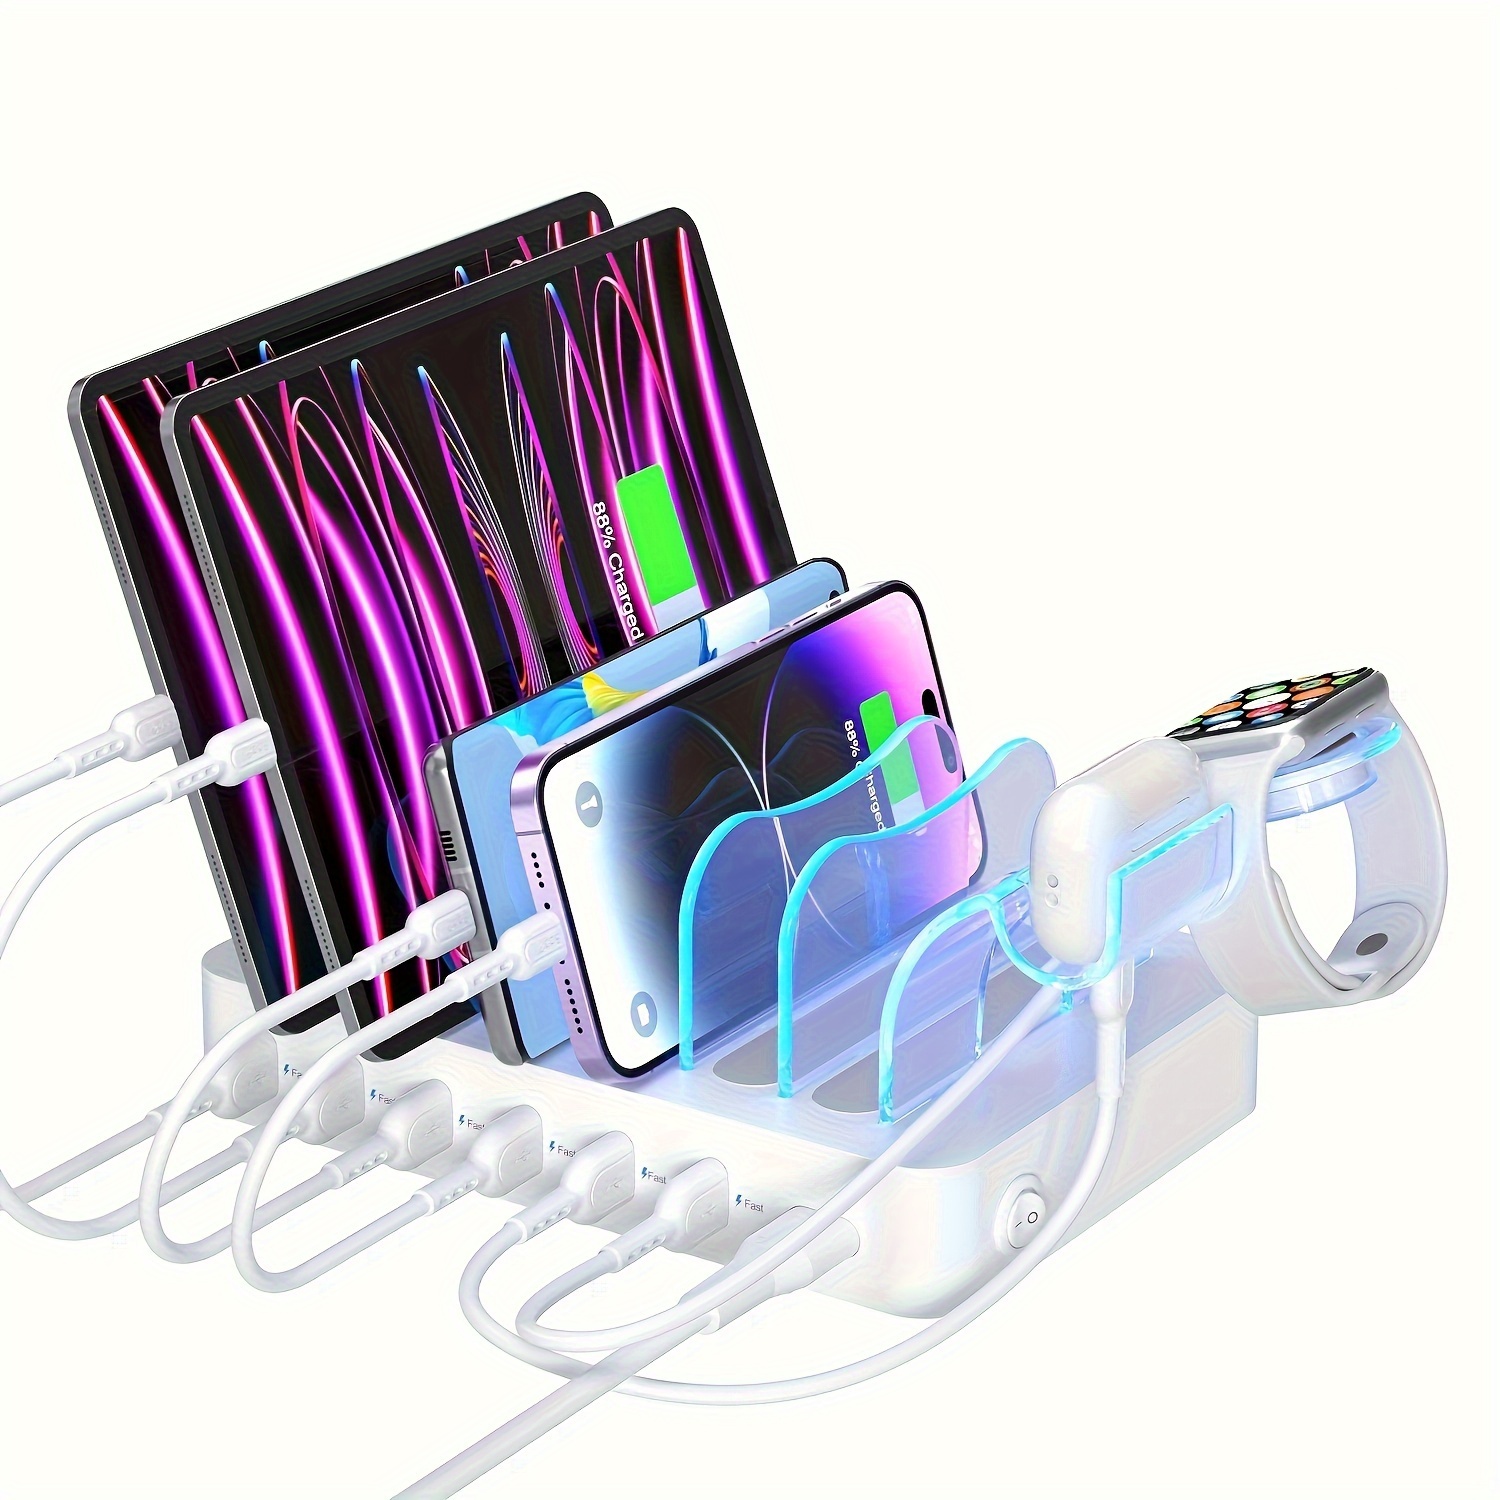 

Premium 6-port Usb Charging Station Organizer For Multiple Devices, 6 Short Charging Cables And 1 Upgraded L-watch Charger Holder Included, For Phones, Tablets, And Other Electronics